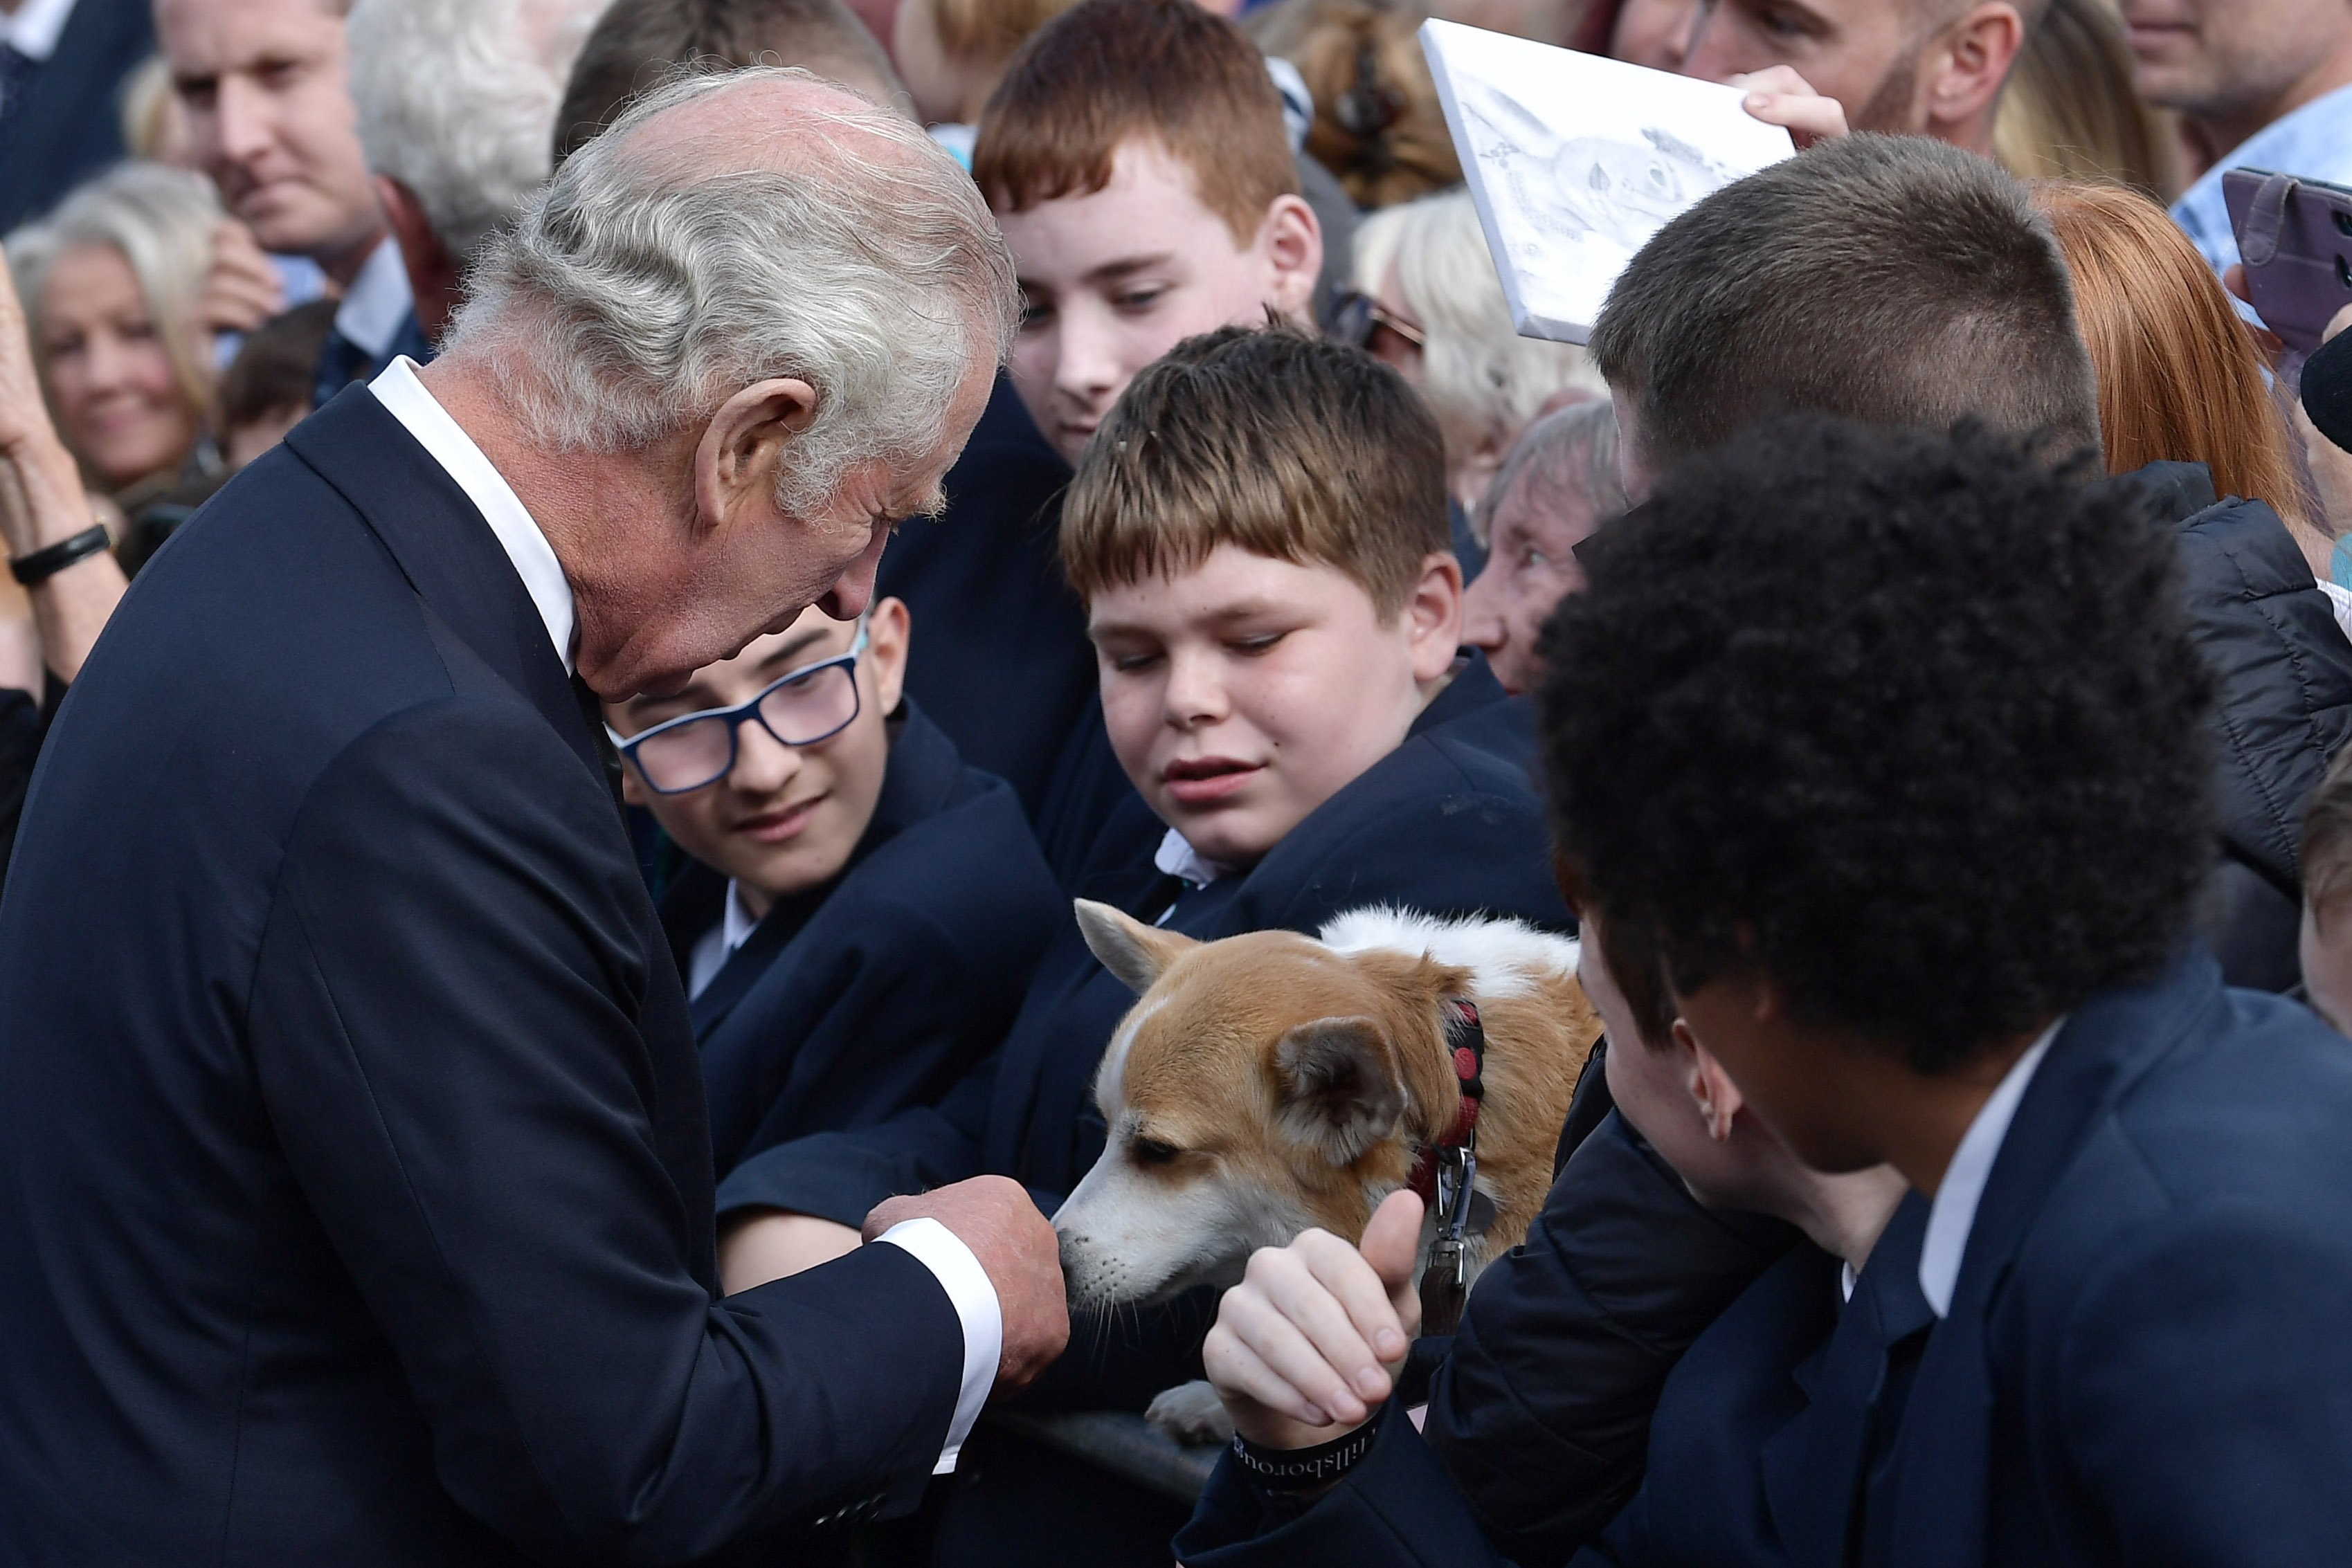 King Charles III greeting well-wishers in Northern Ireland in 2022. | Source: Getty Images 